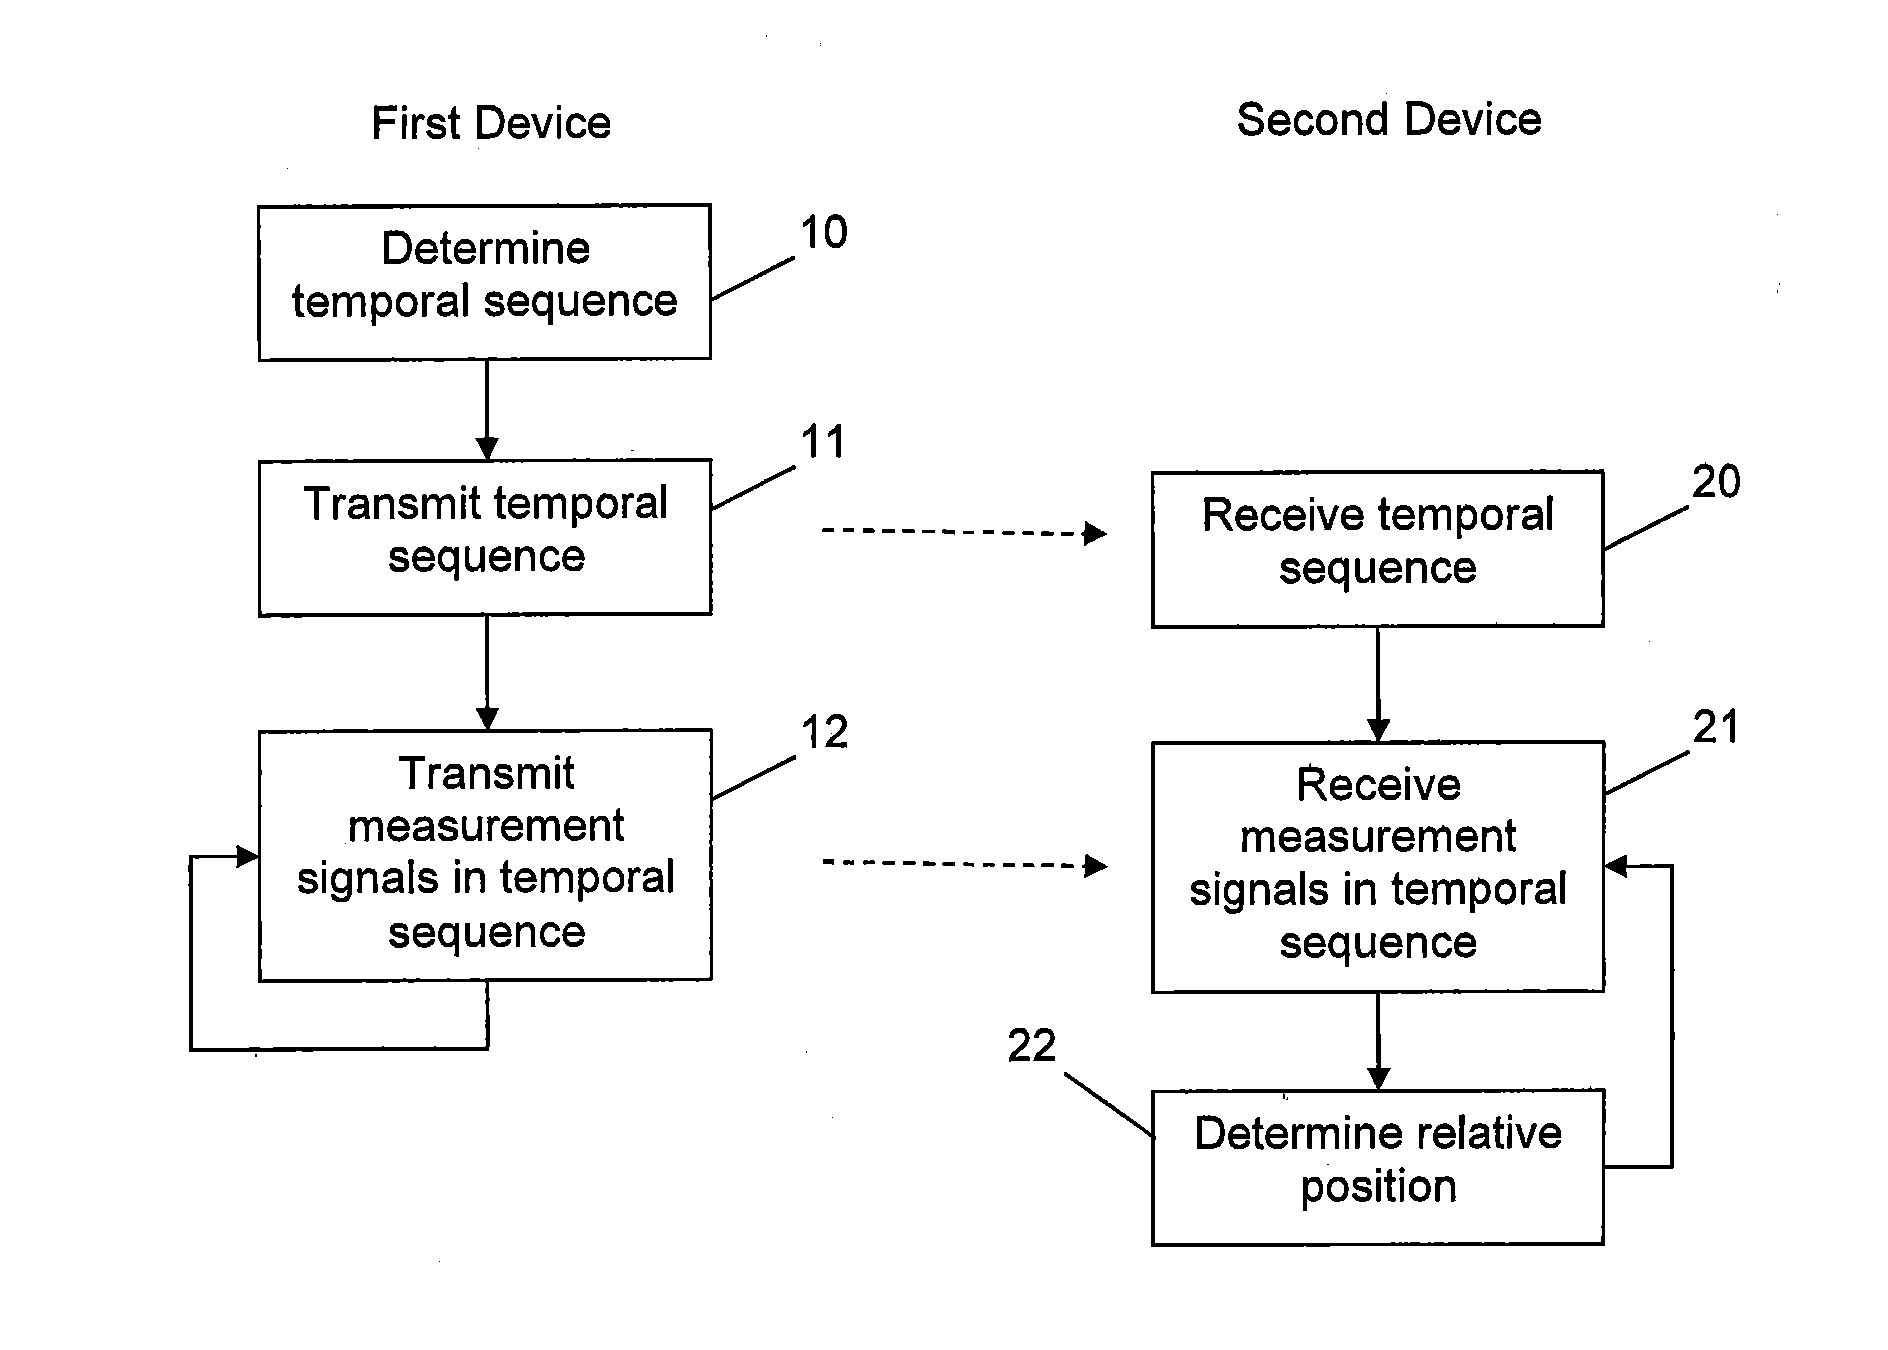 Determining a relative position between devices